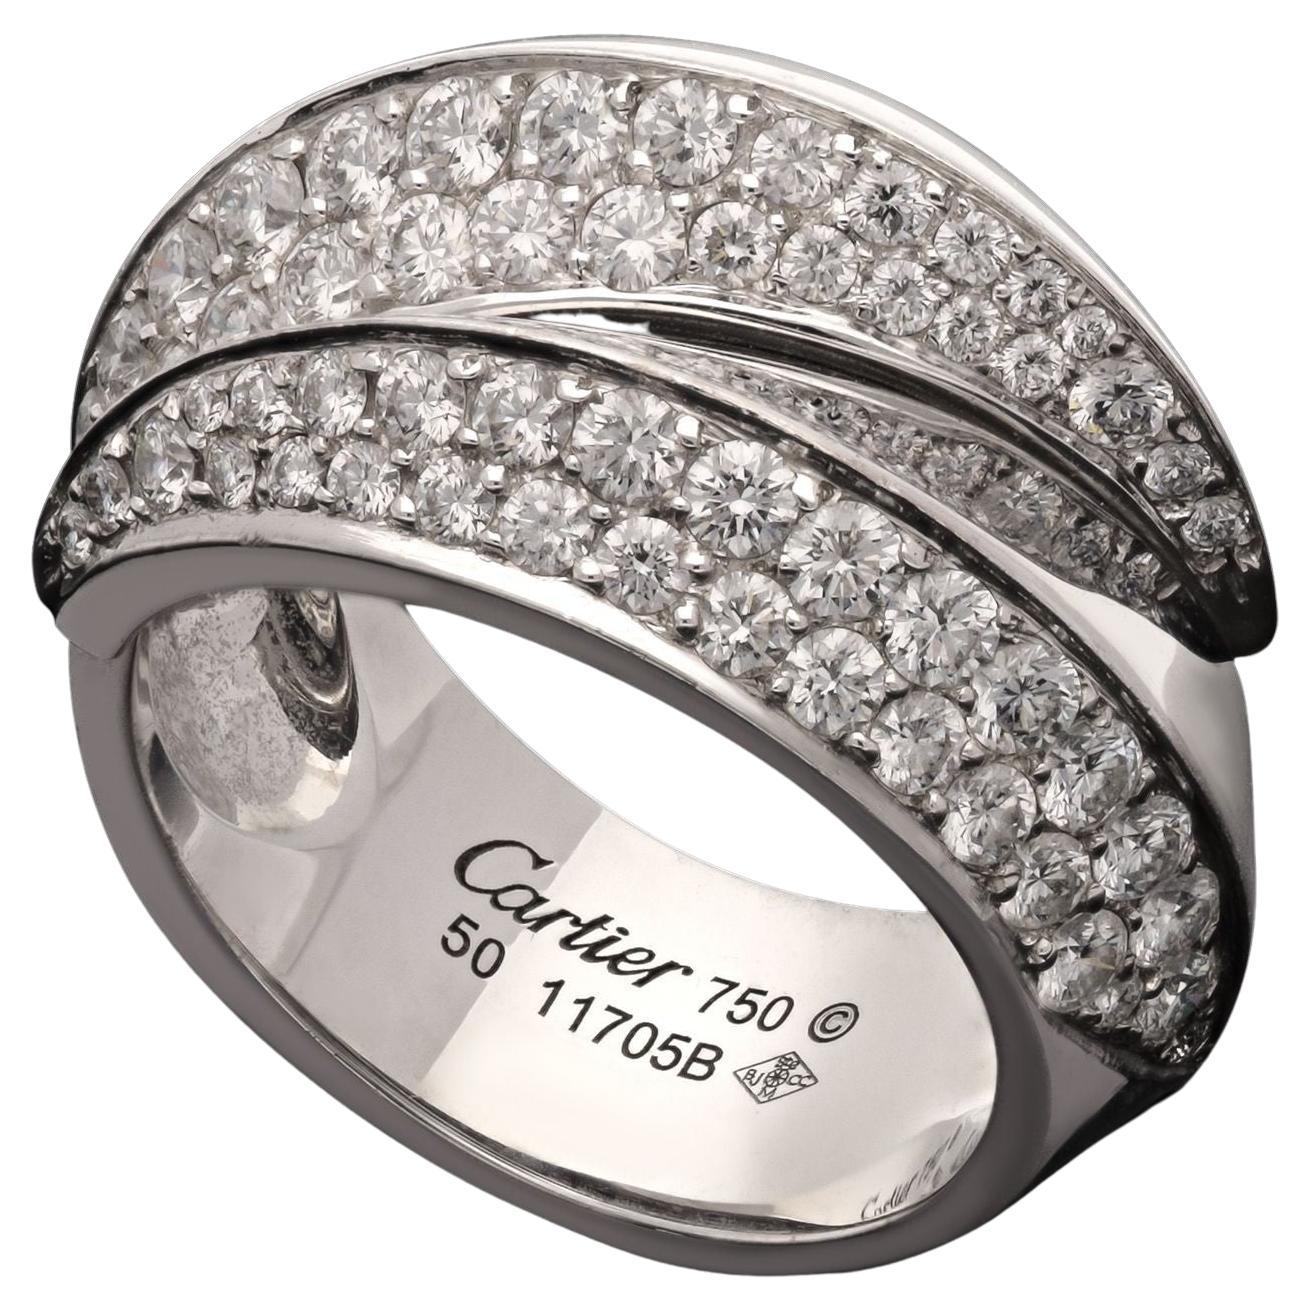 Cartier Panthère Griffe 18ct White Gold and Diamond Crossover Ring, circa 2000s For Sale